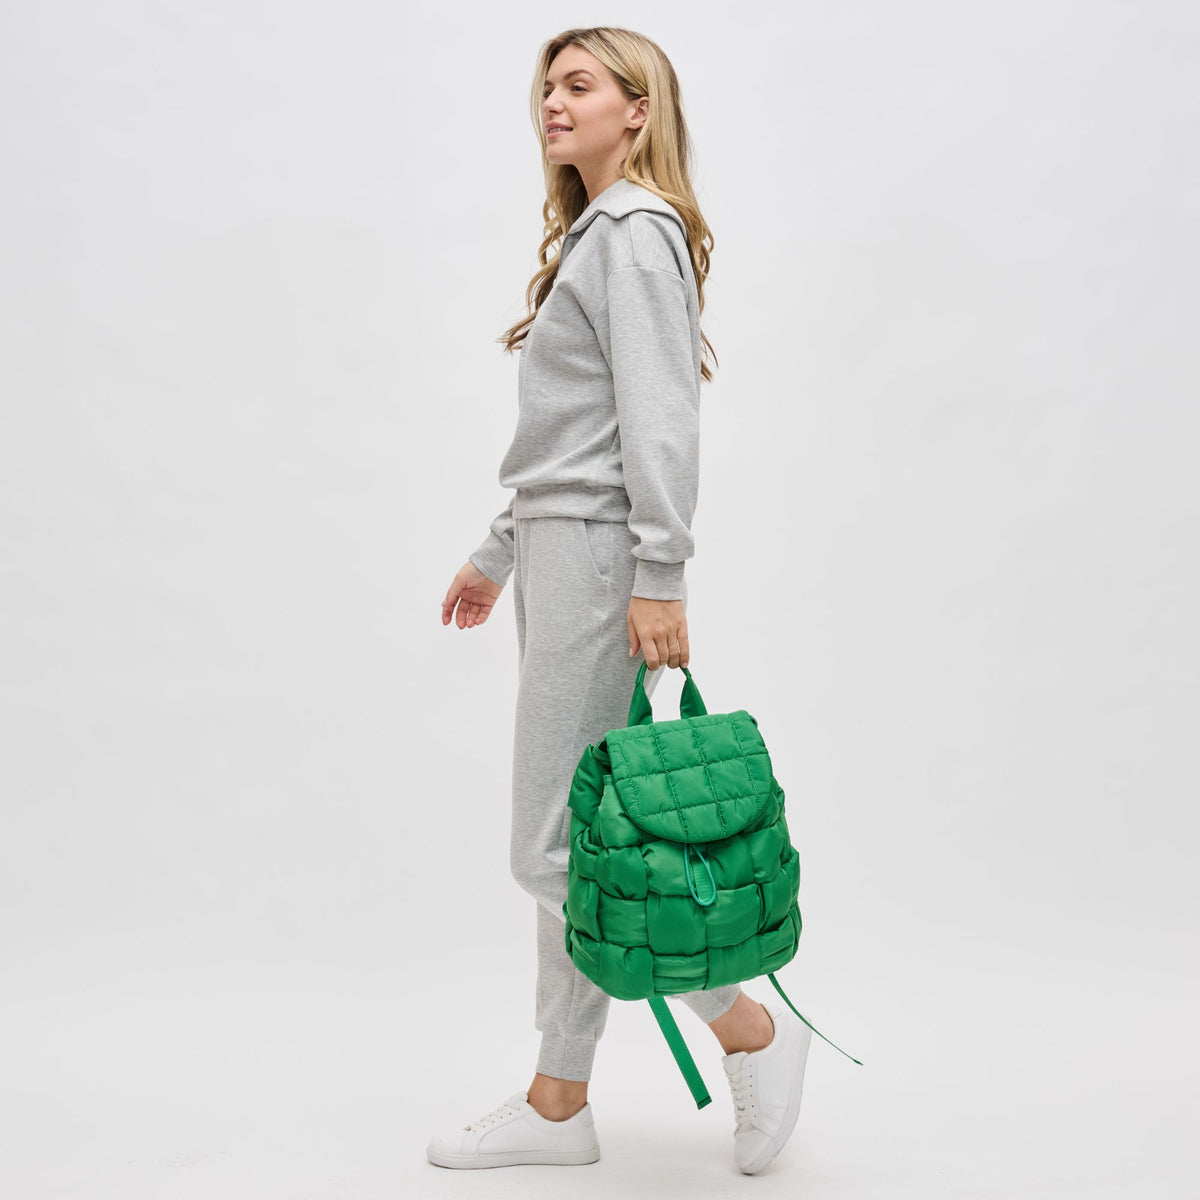 Woman wearing Kelly Green Sol and Selene Perception Backpack 841764107952 View 4 | Kelly Green